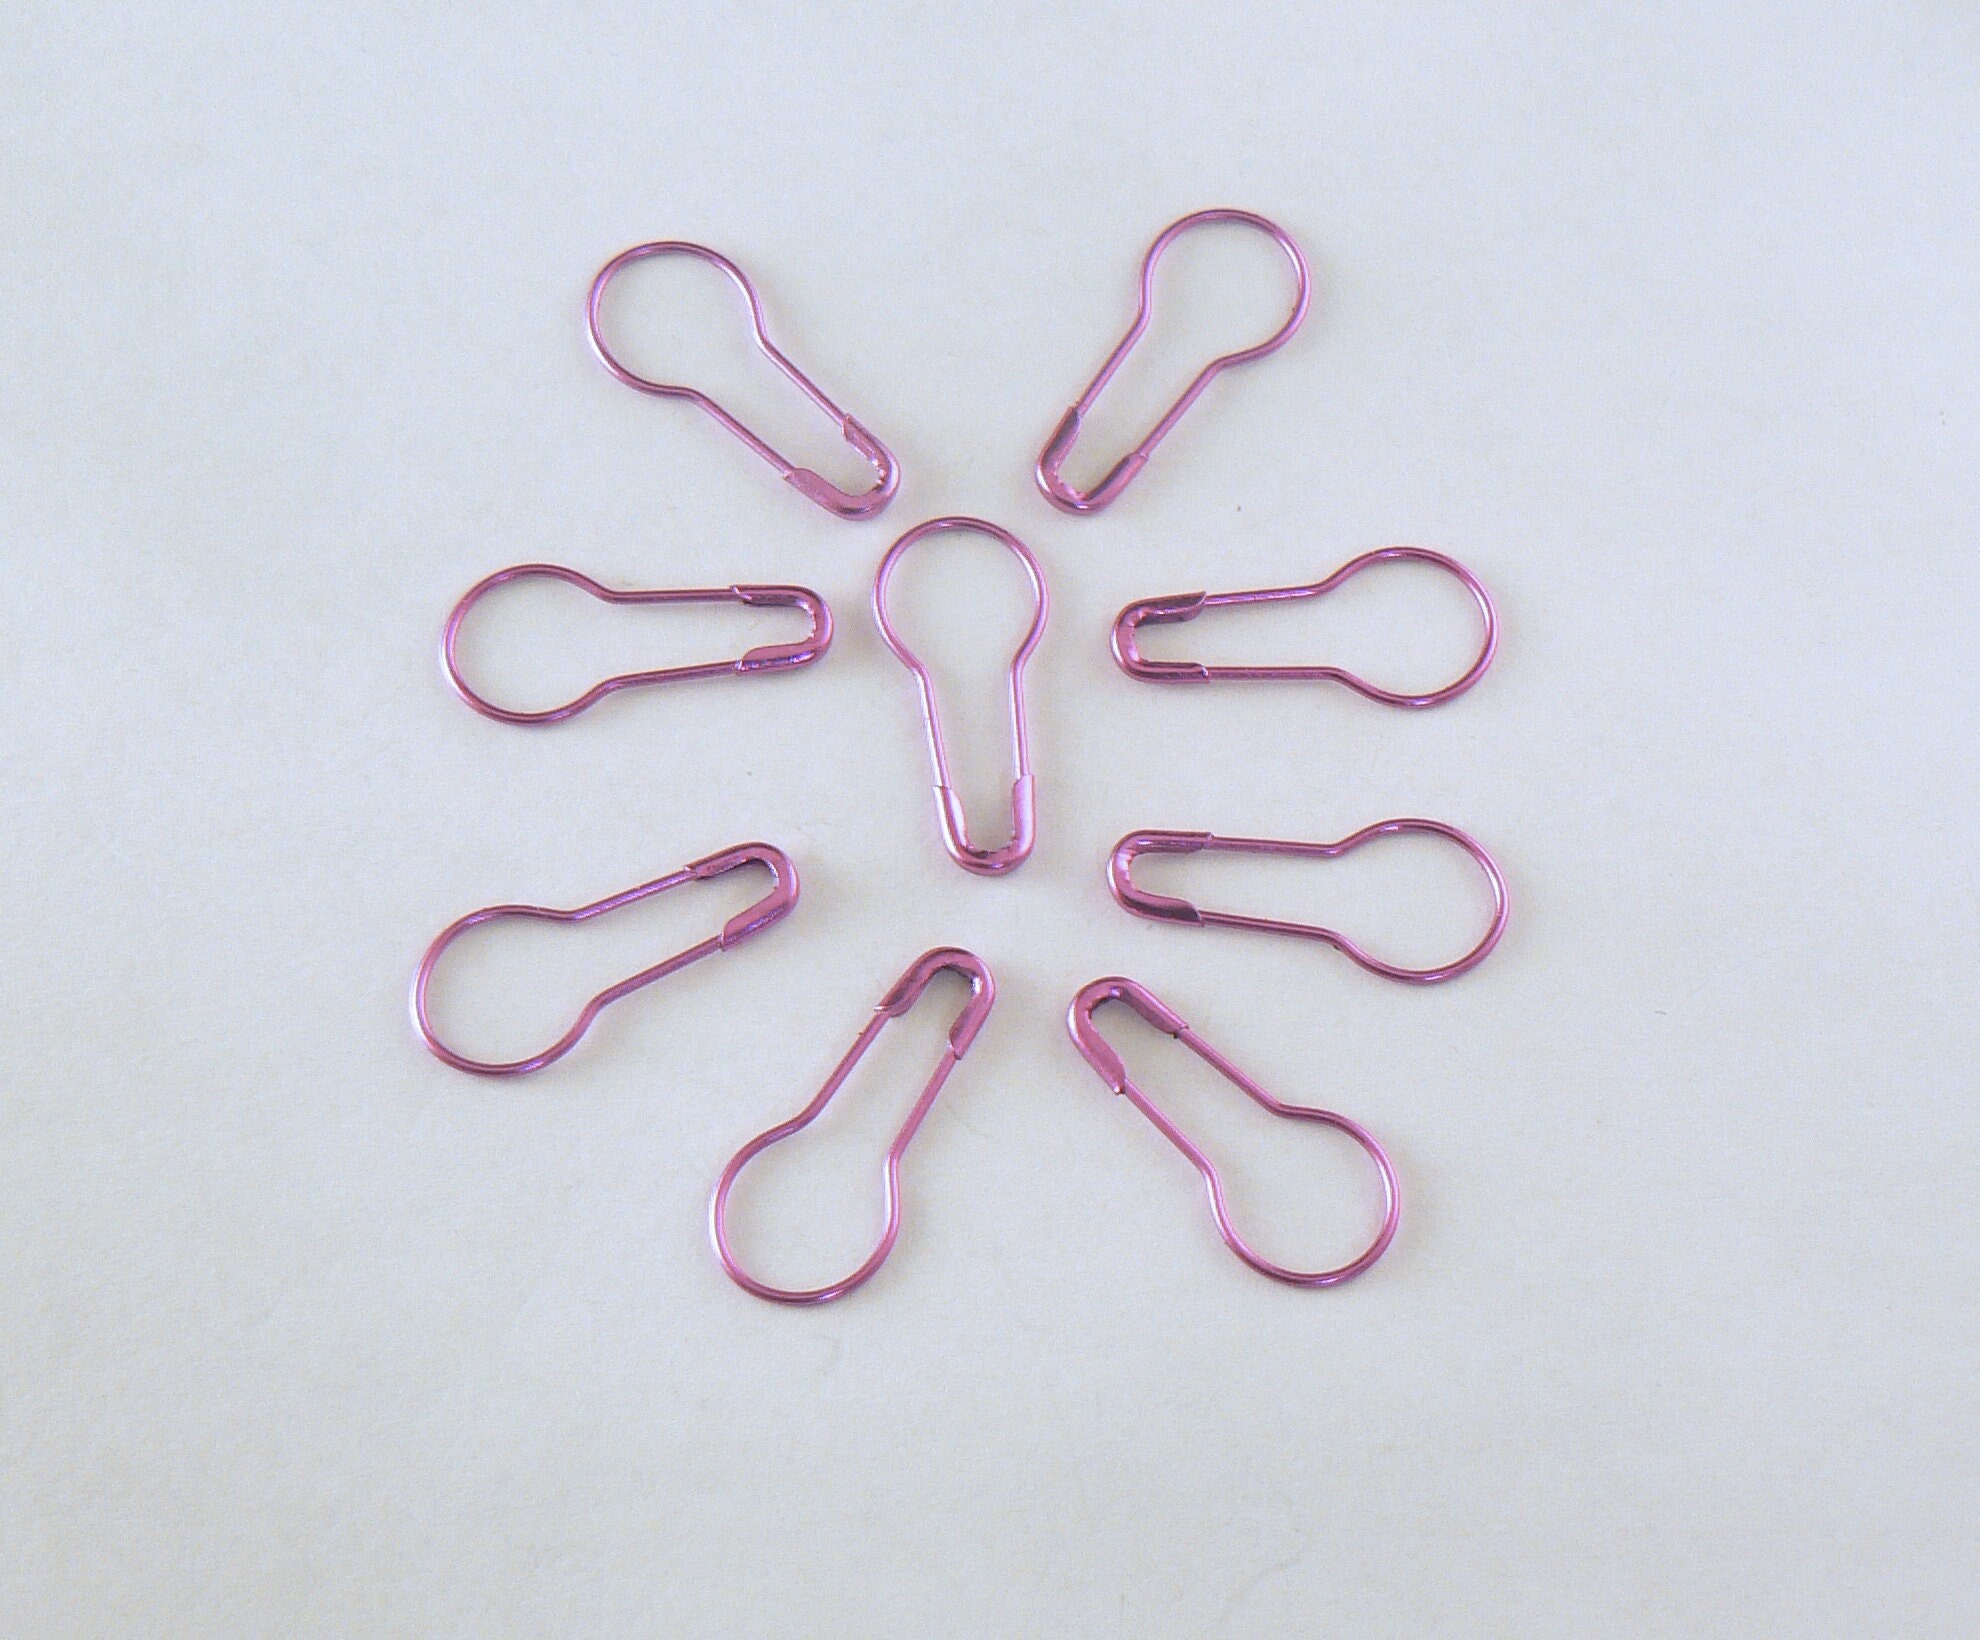 Locking Metal Stitch Markers Are Pear-shaped for Snag Free Knitting and  Crocheting, in Antique Bronze and Black Finish 